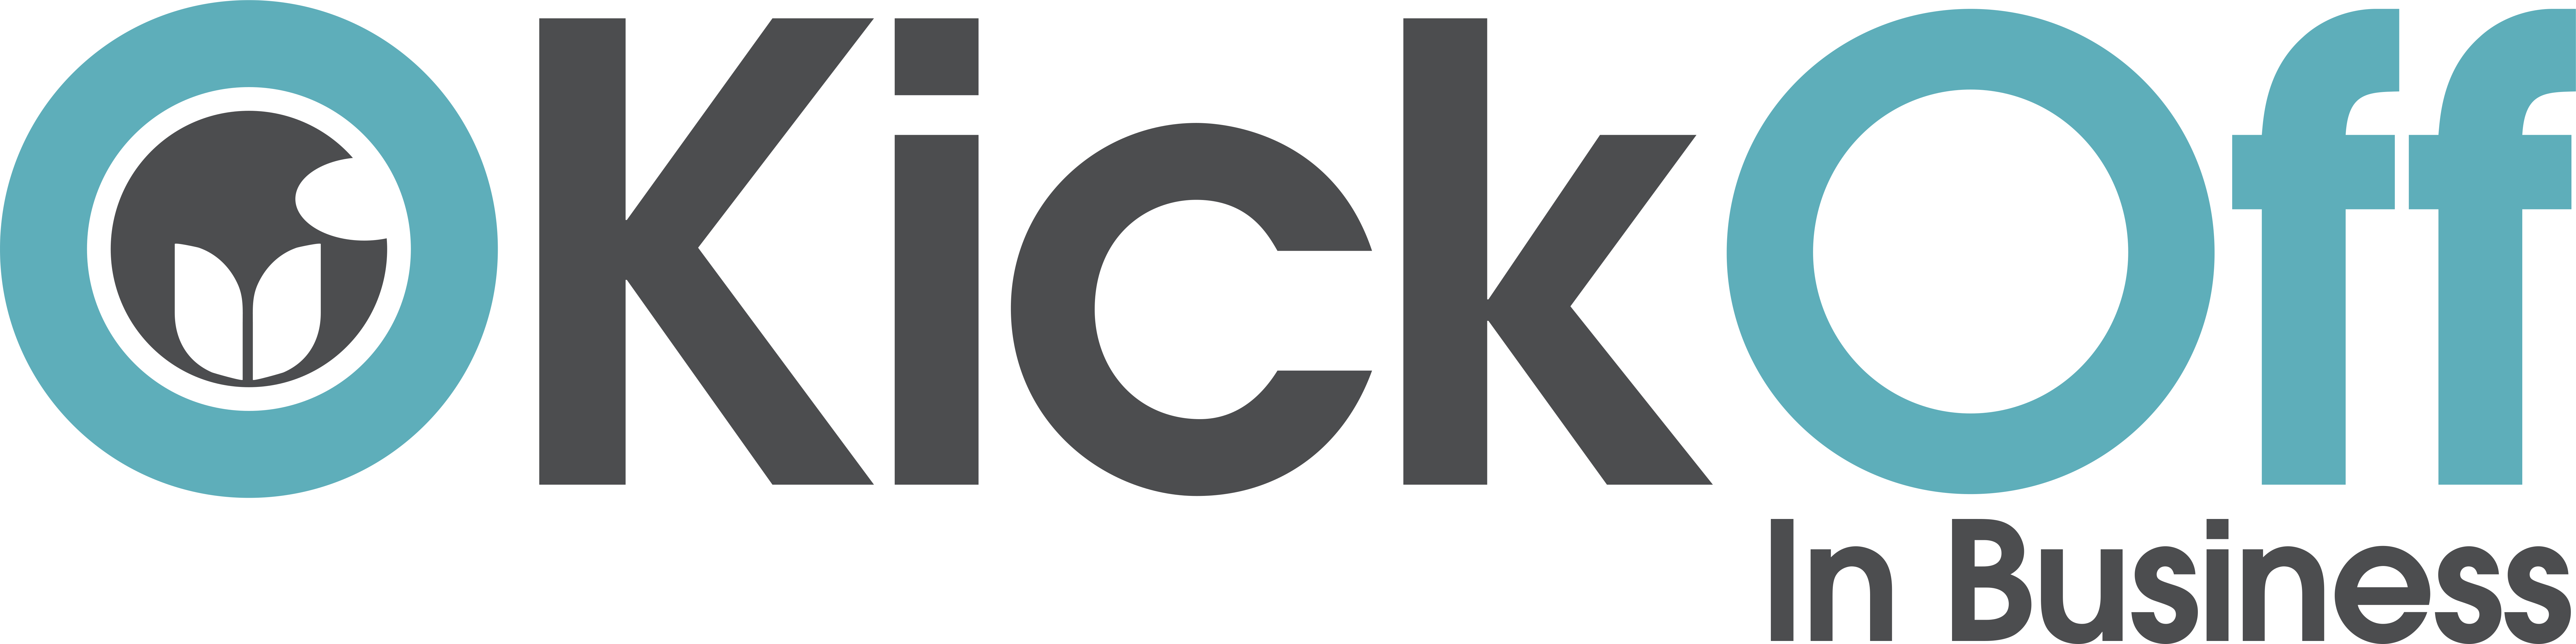 Kick off in Business logo